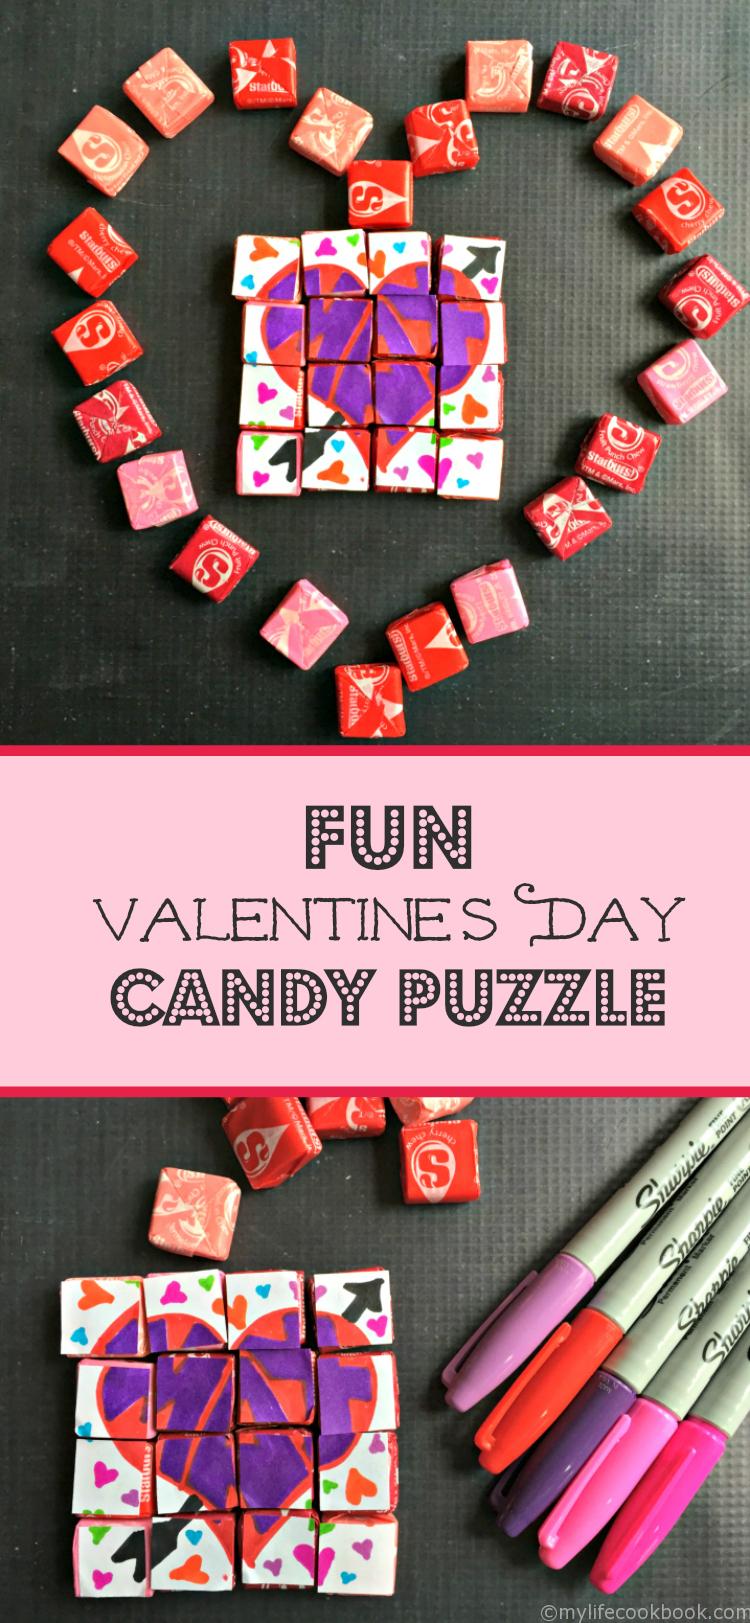 This is a fun Valentines Day candy puzzle that your kids can make. Using candy as puzzle pieces makes for an easy and fun craft for school.